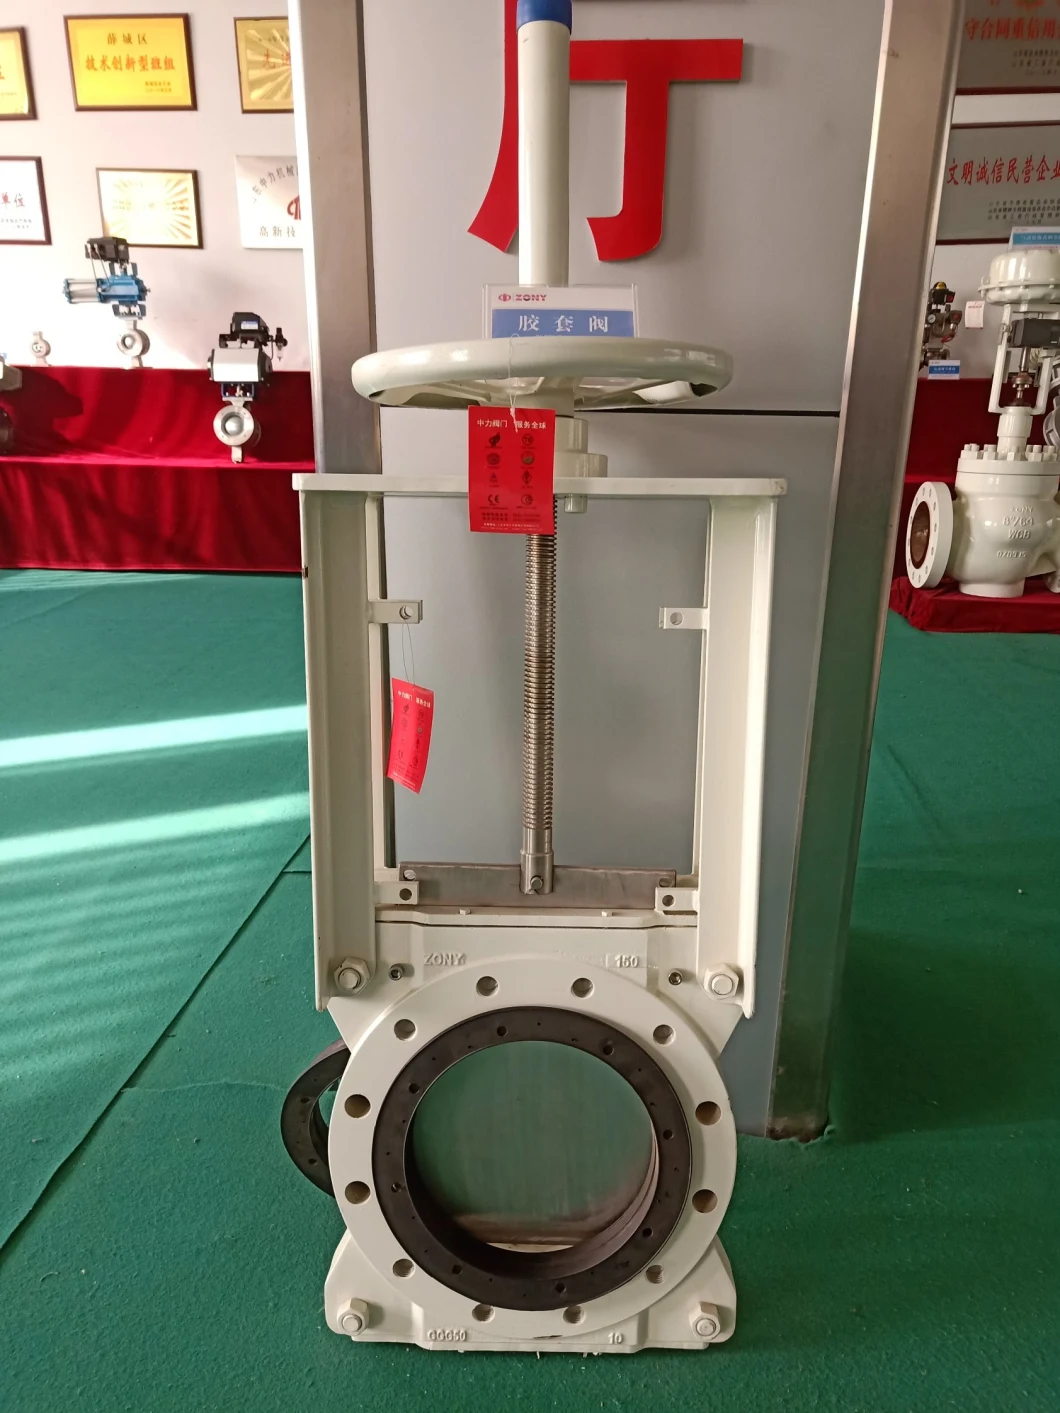 Mining Slurry Knife Gate Valve with Hand Wheel / Pneumatic / Electric Actuator